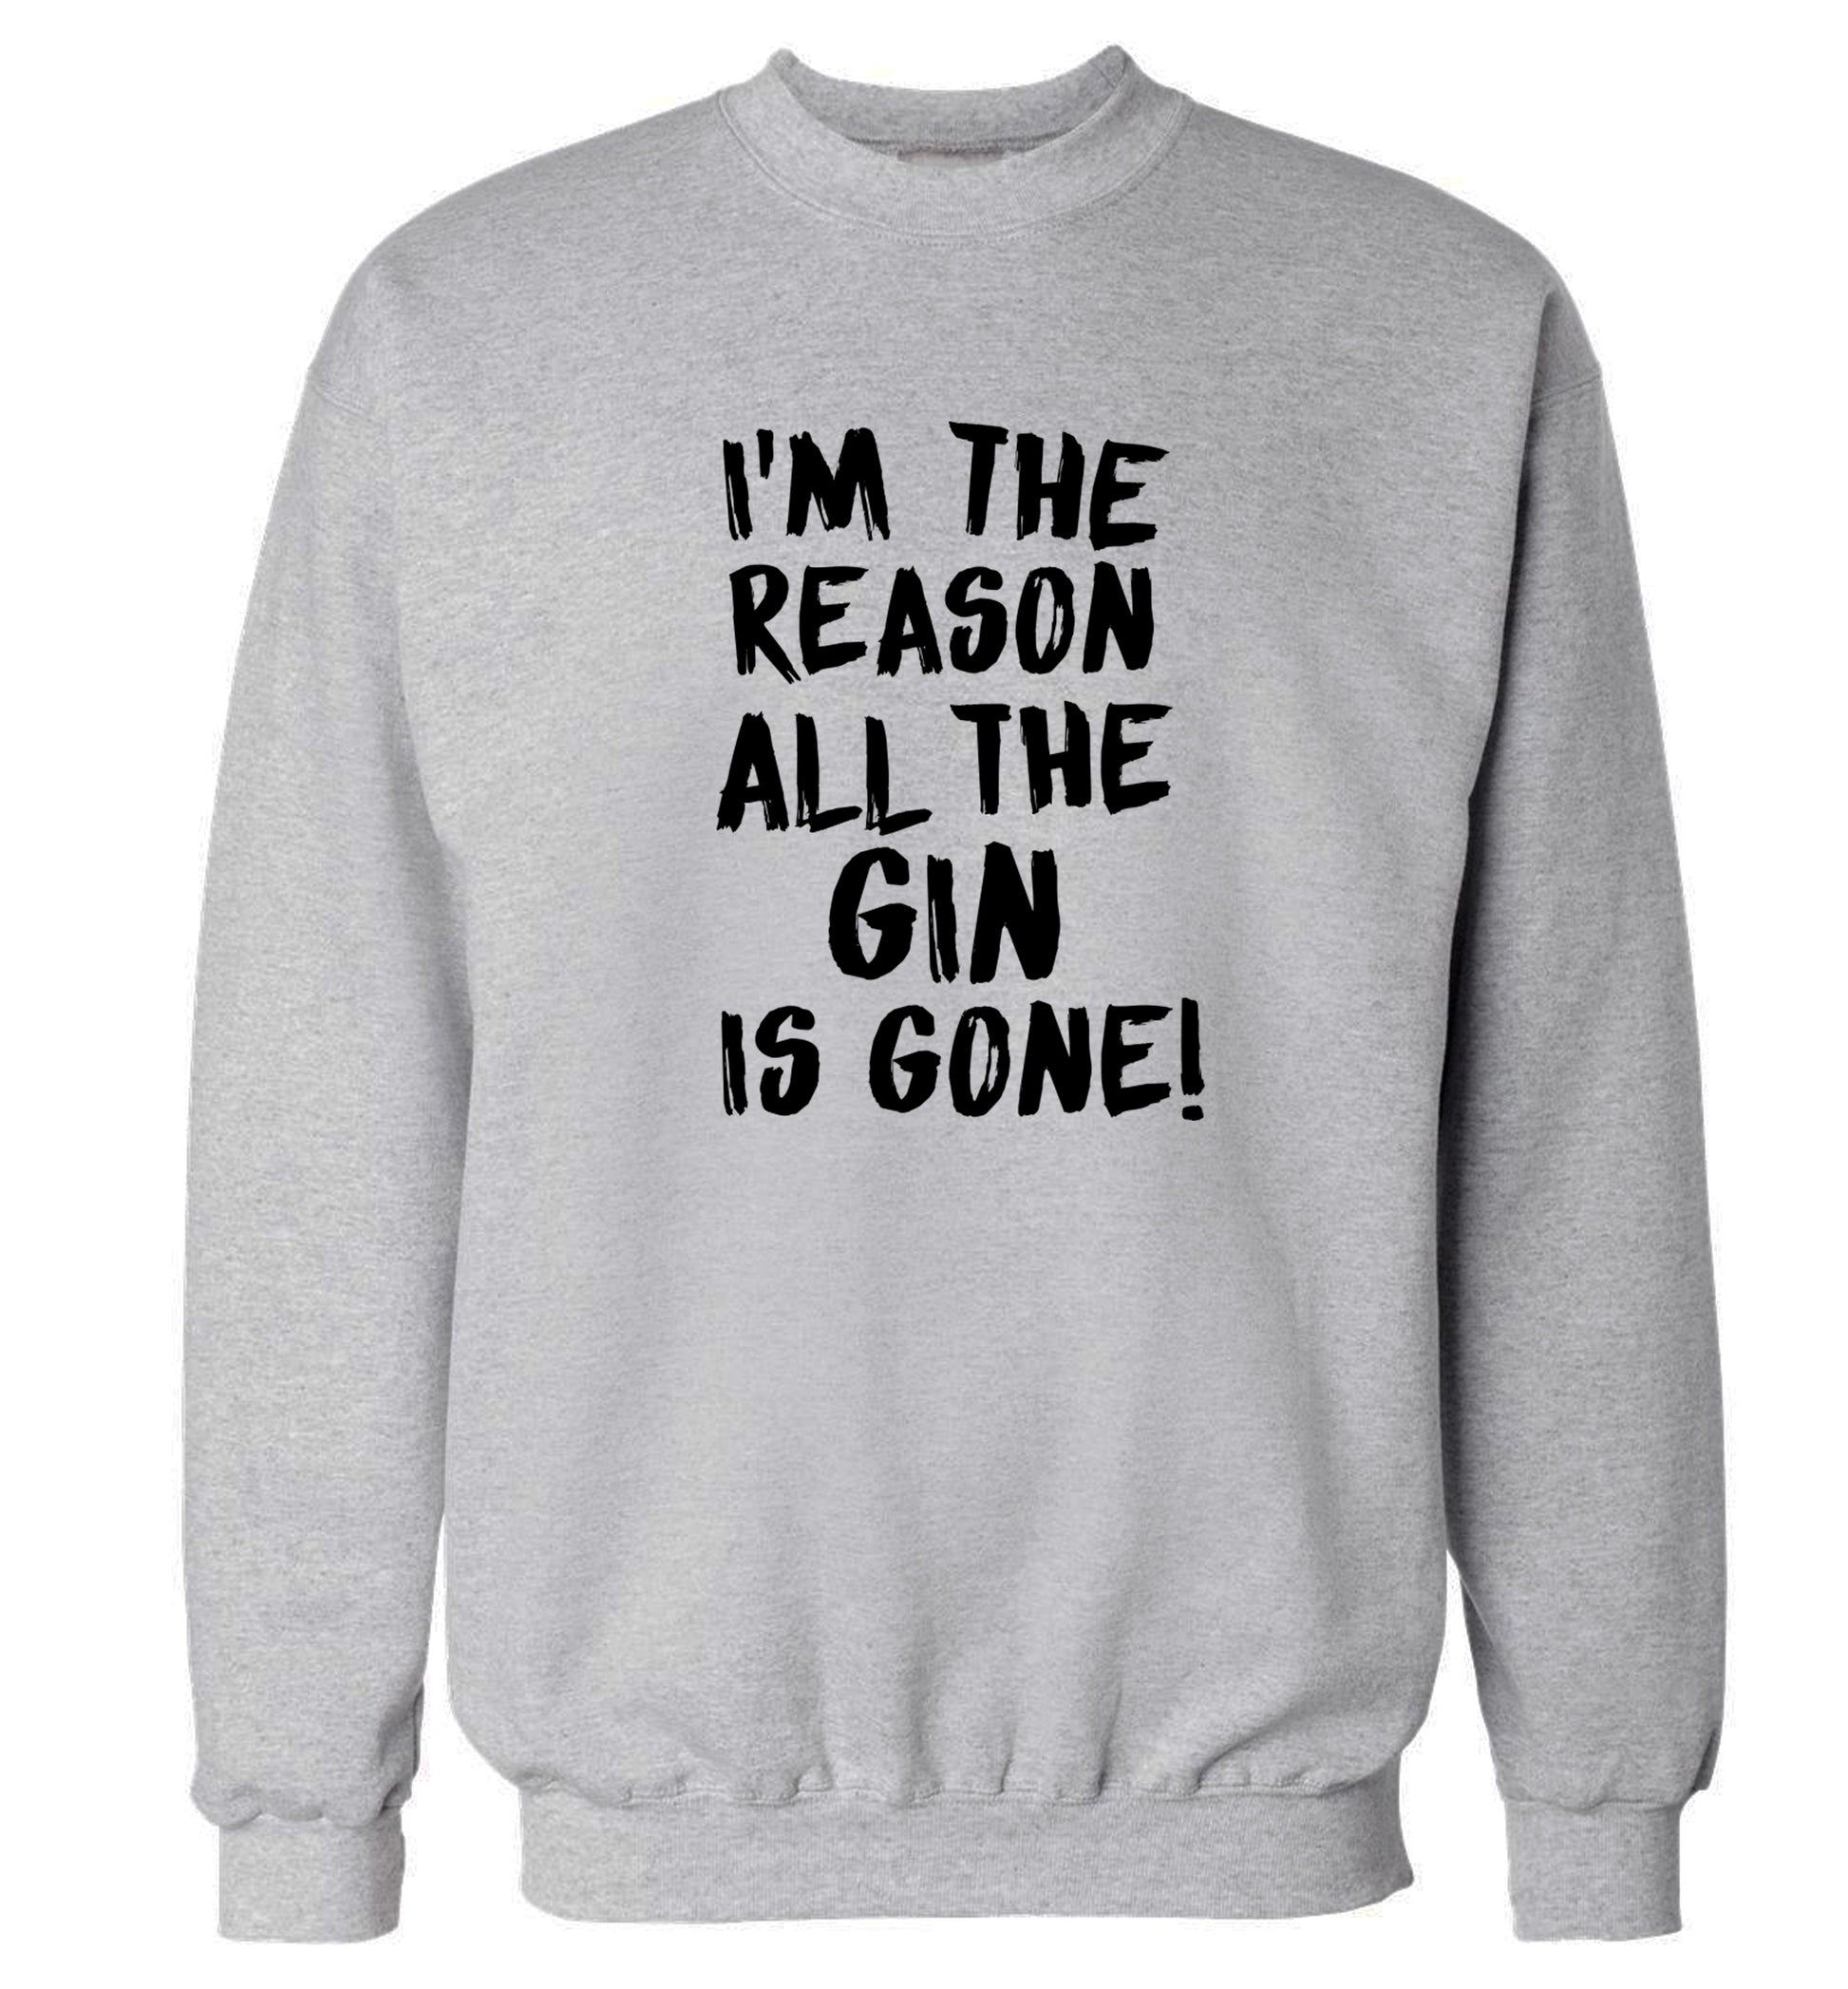 I'm the reason all the gin is gone Adult's unisex grey Sweater 2XL